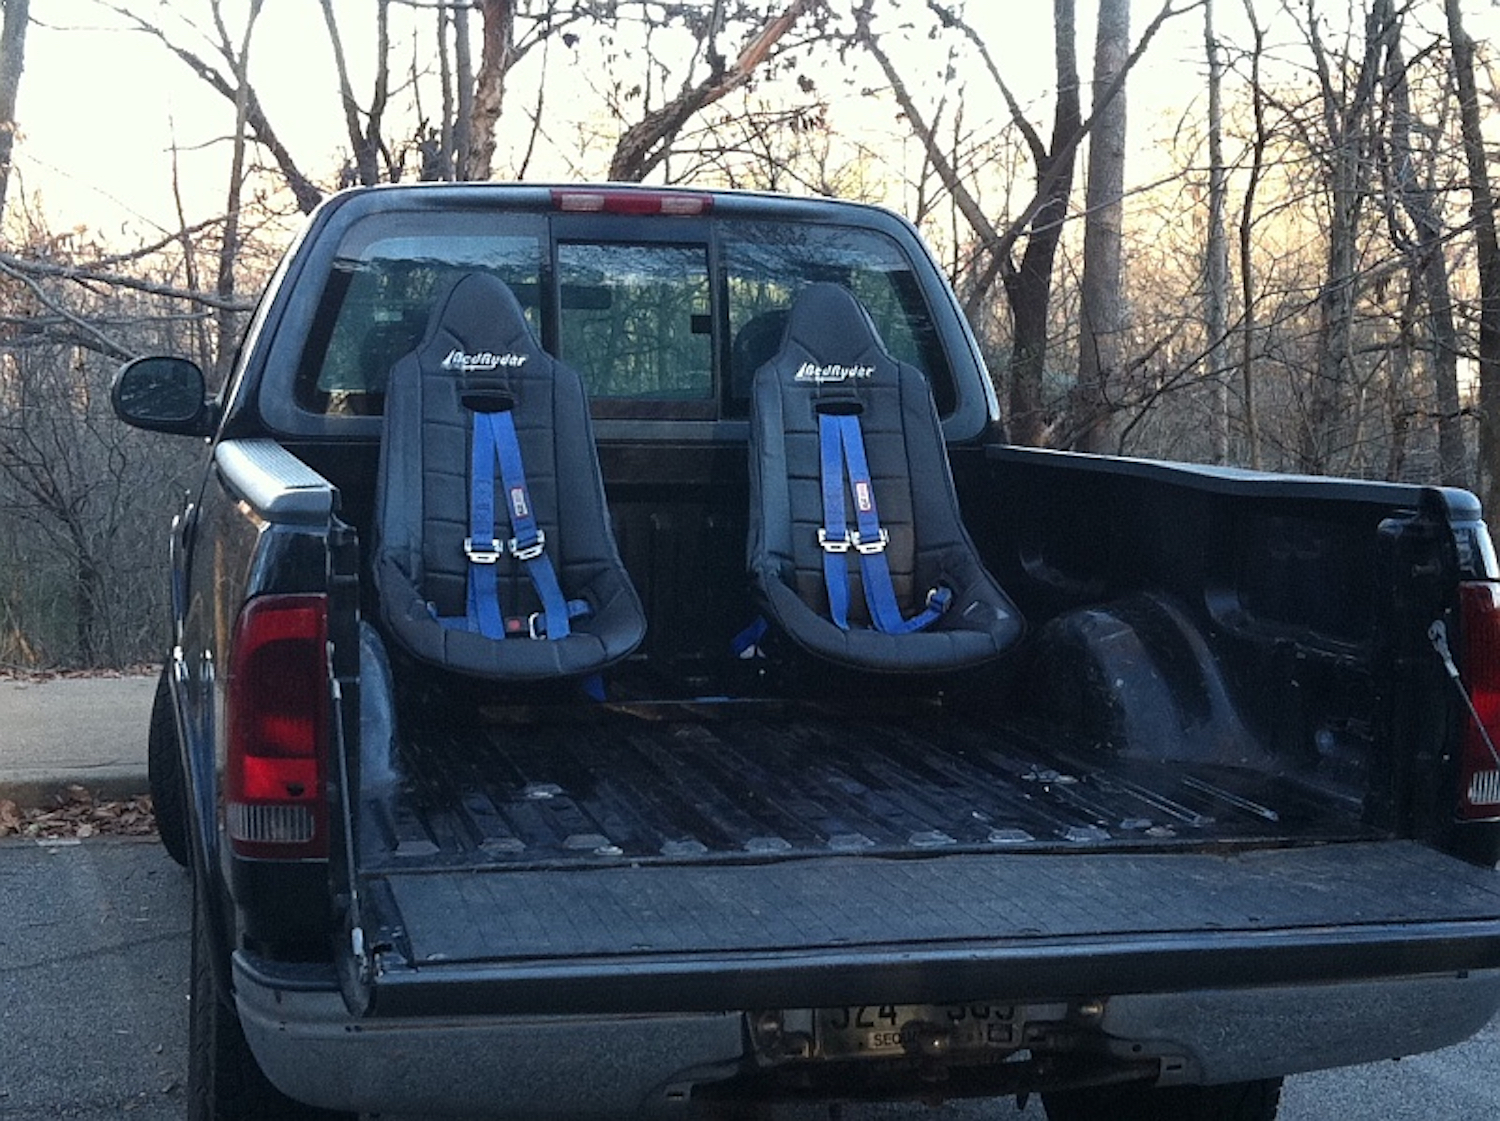 This pickup truck has been modified with BedRyder jump seats and seat belts to transport passengers in its bed, legally.